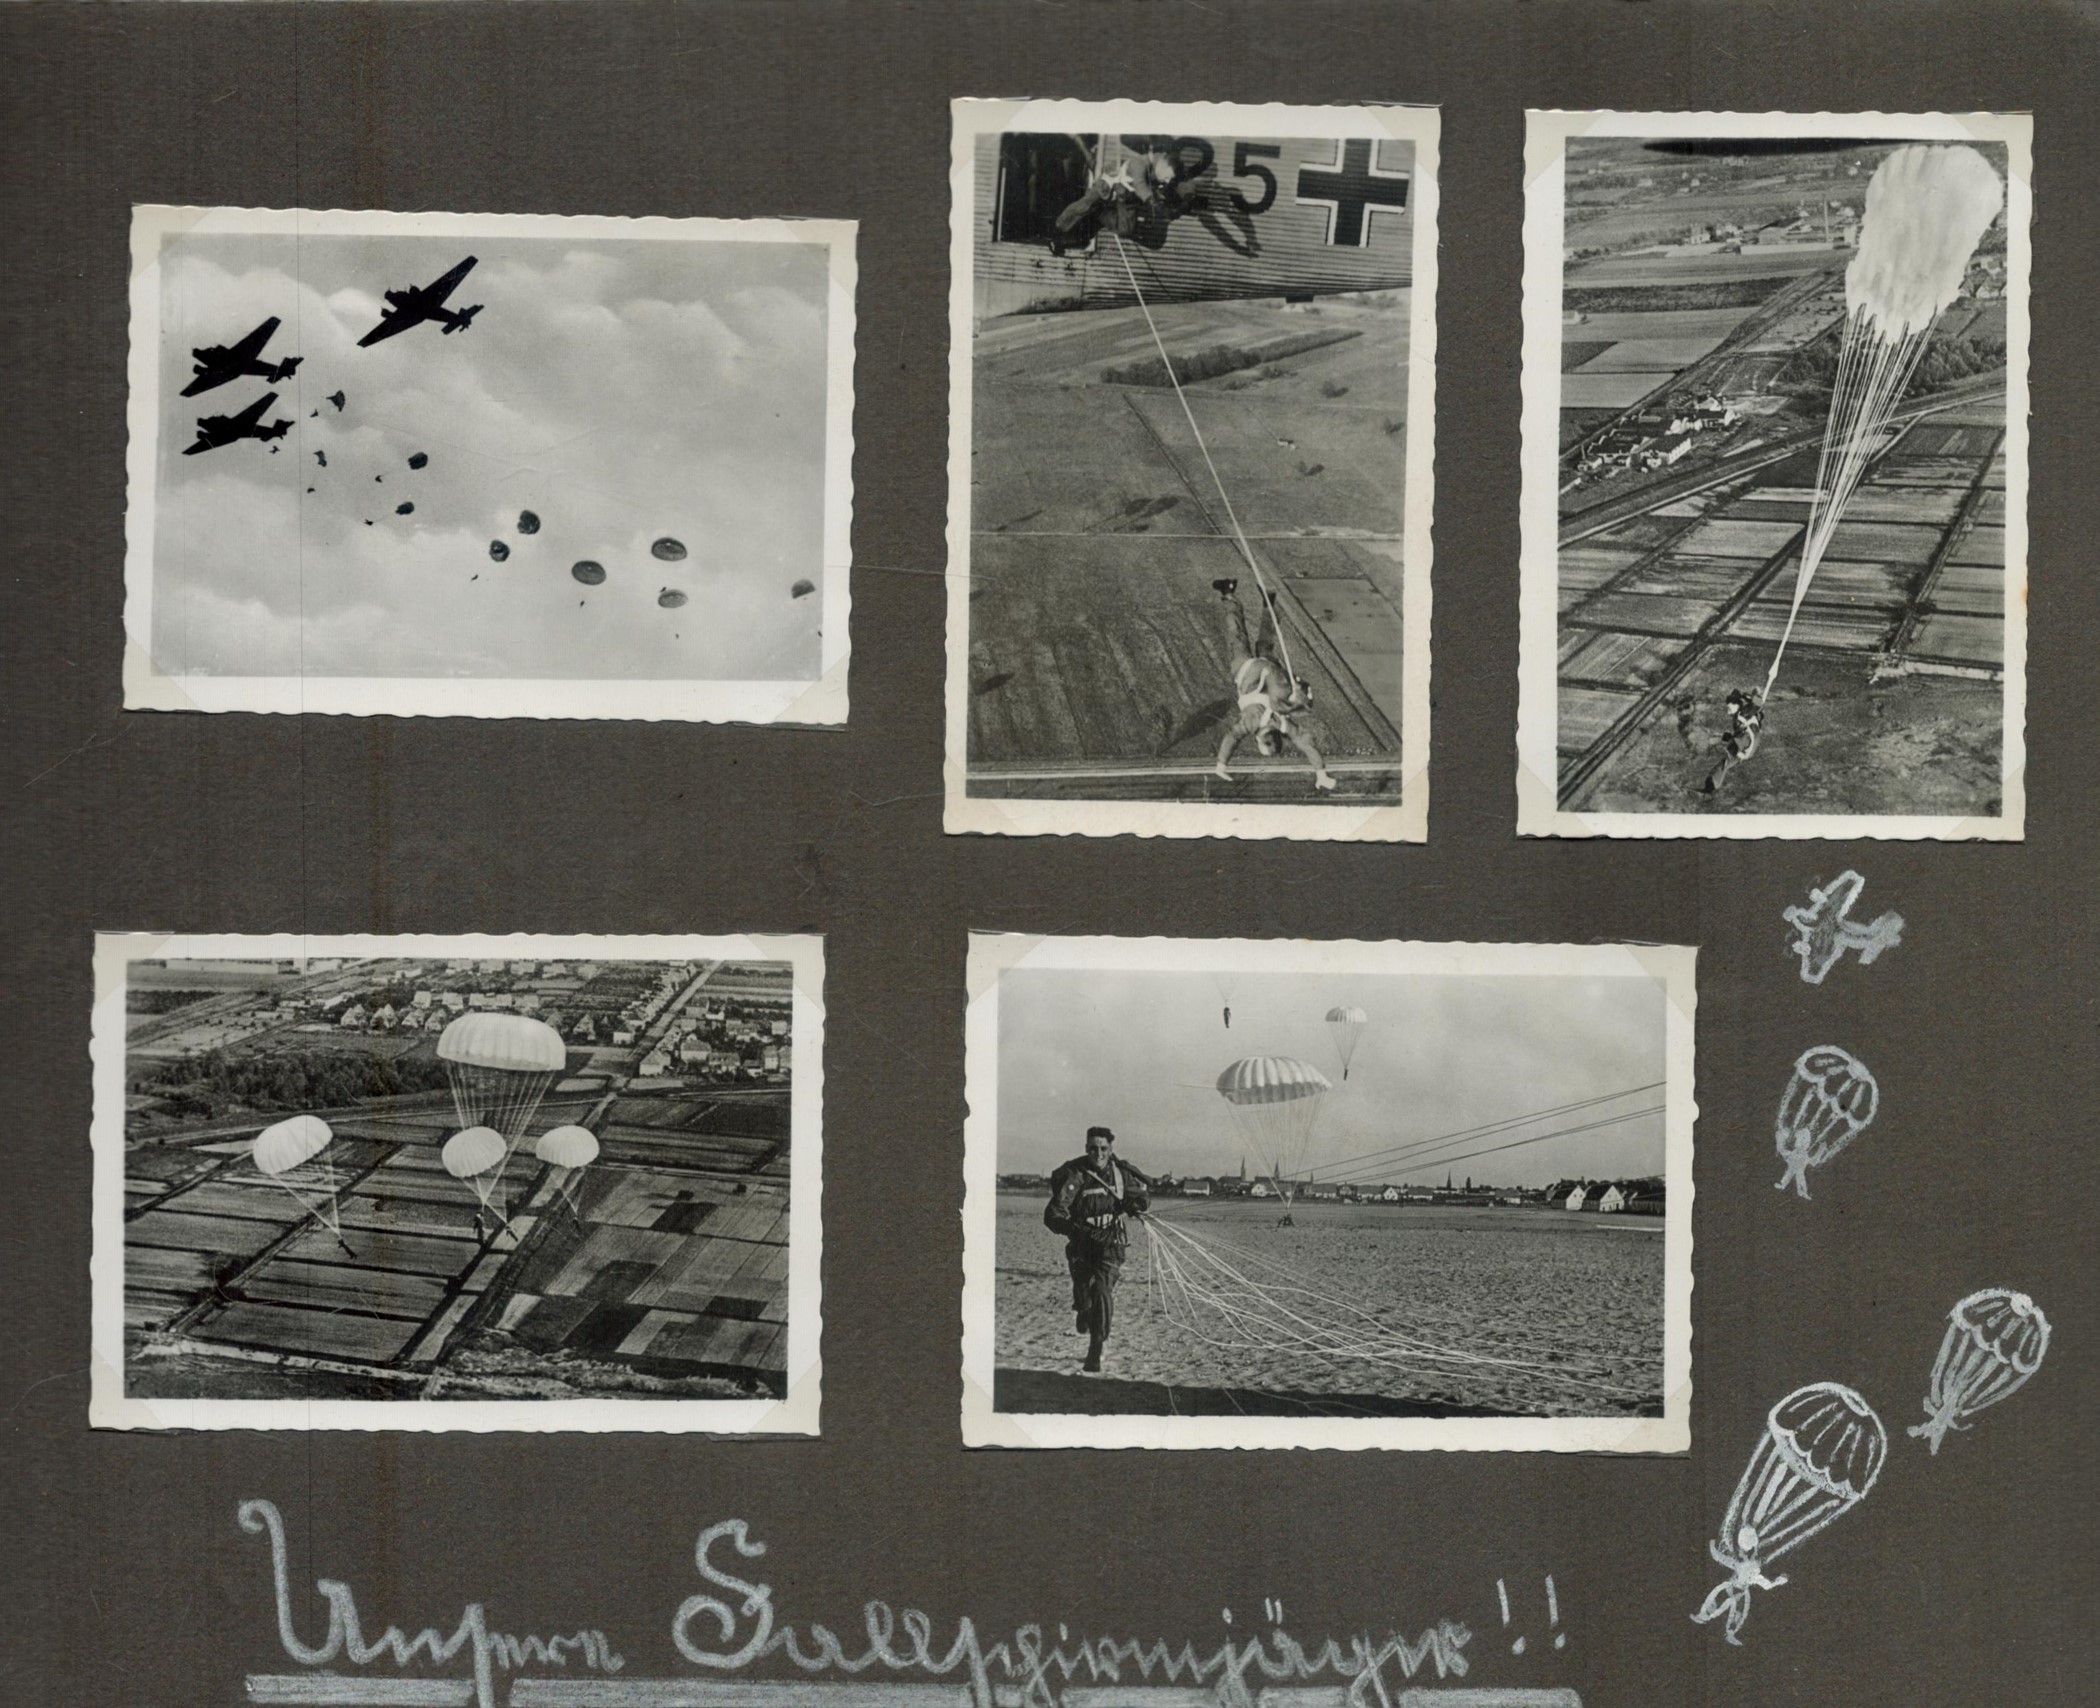 Luftwaffe Pilot photo album full of unsigned black and white photos of Luftwaffe pilots.